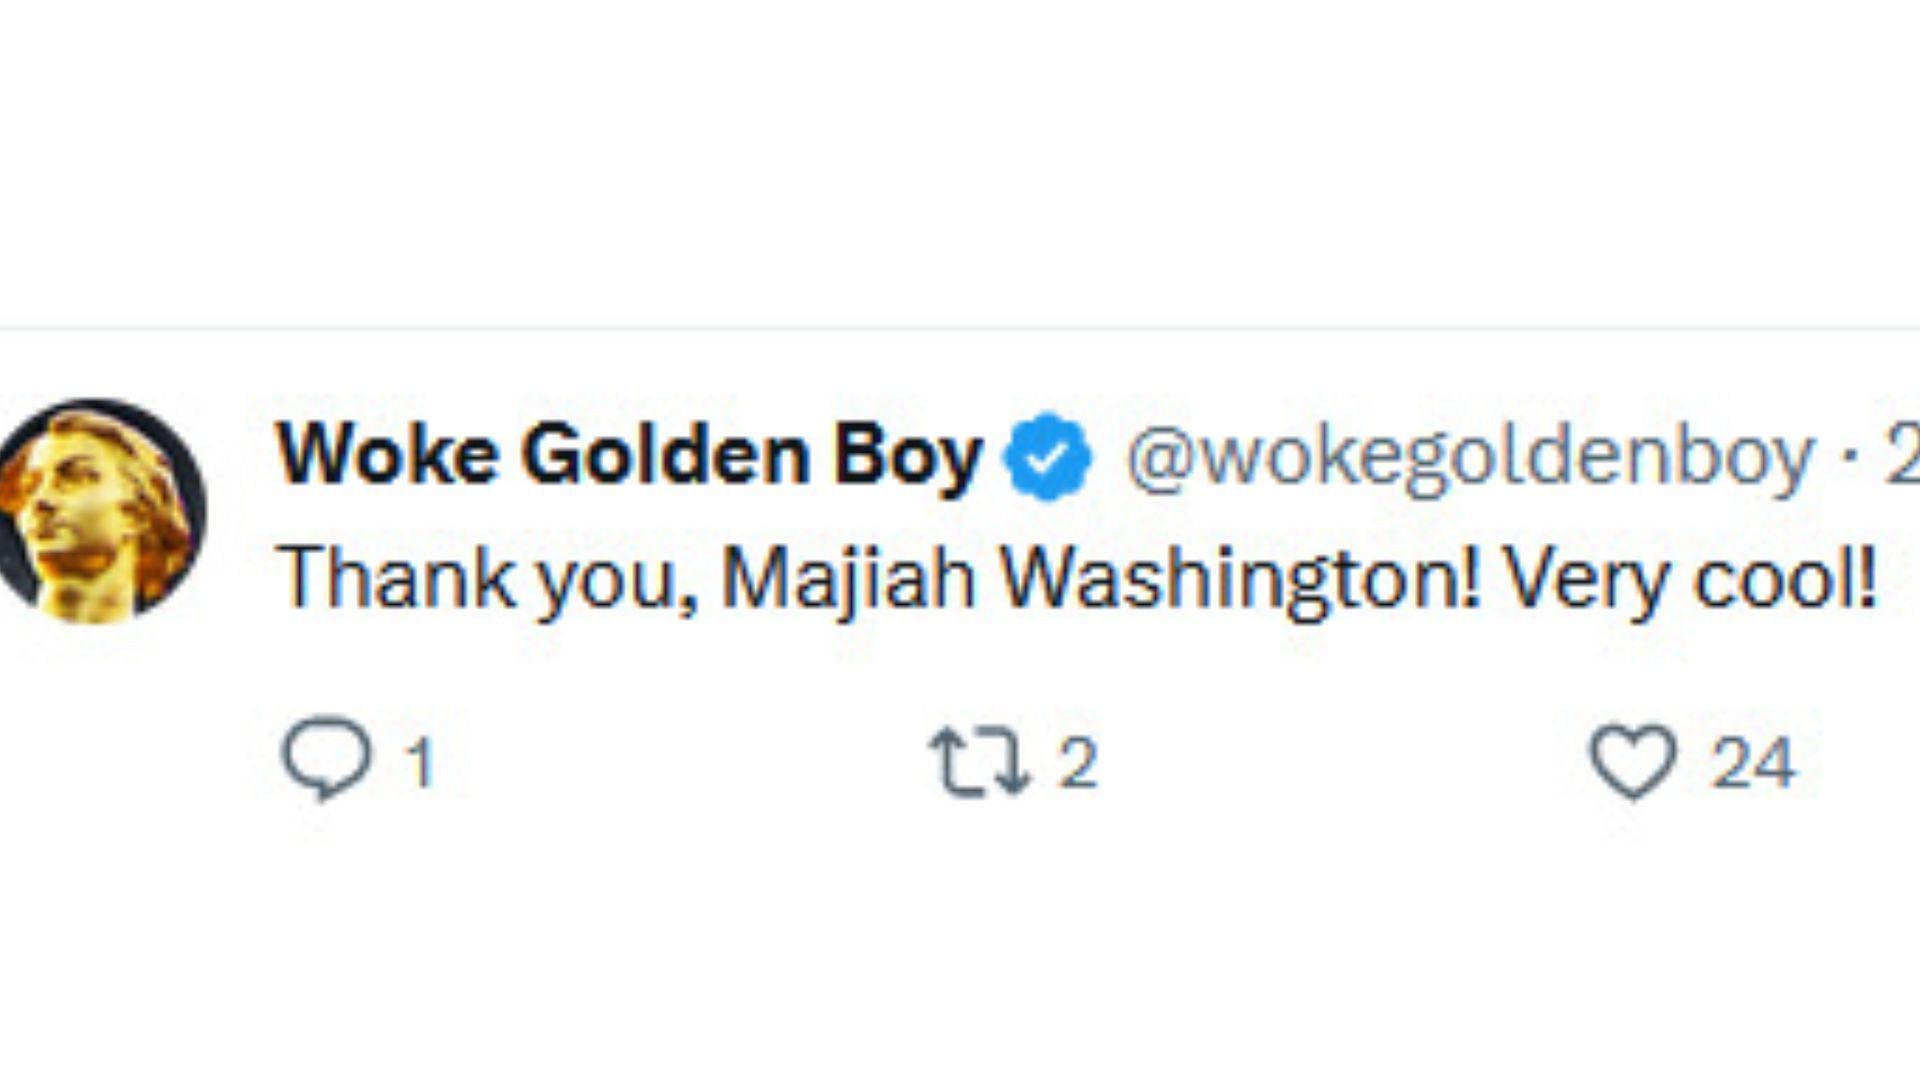 Netizens praise Washington as she saves a 9-month-old baby from dying (Image via X / @wokegoldenboy)